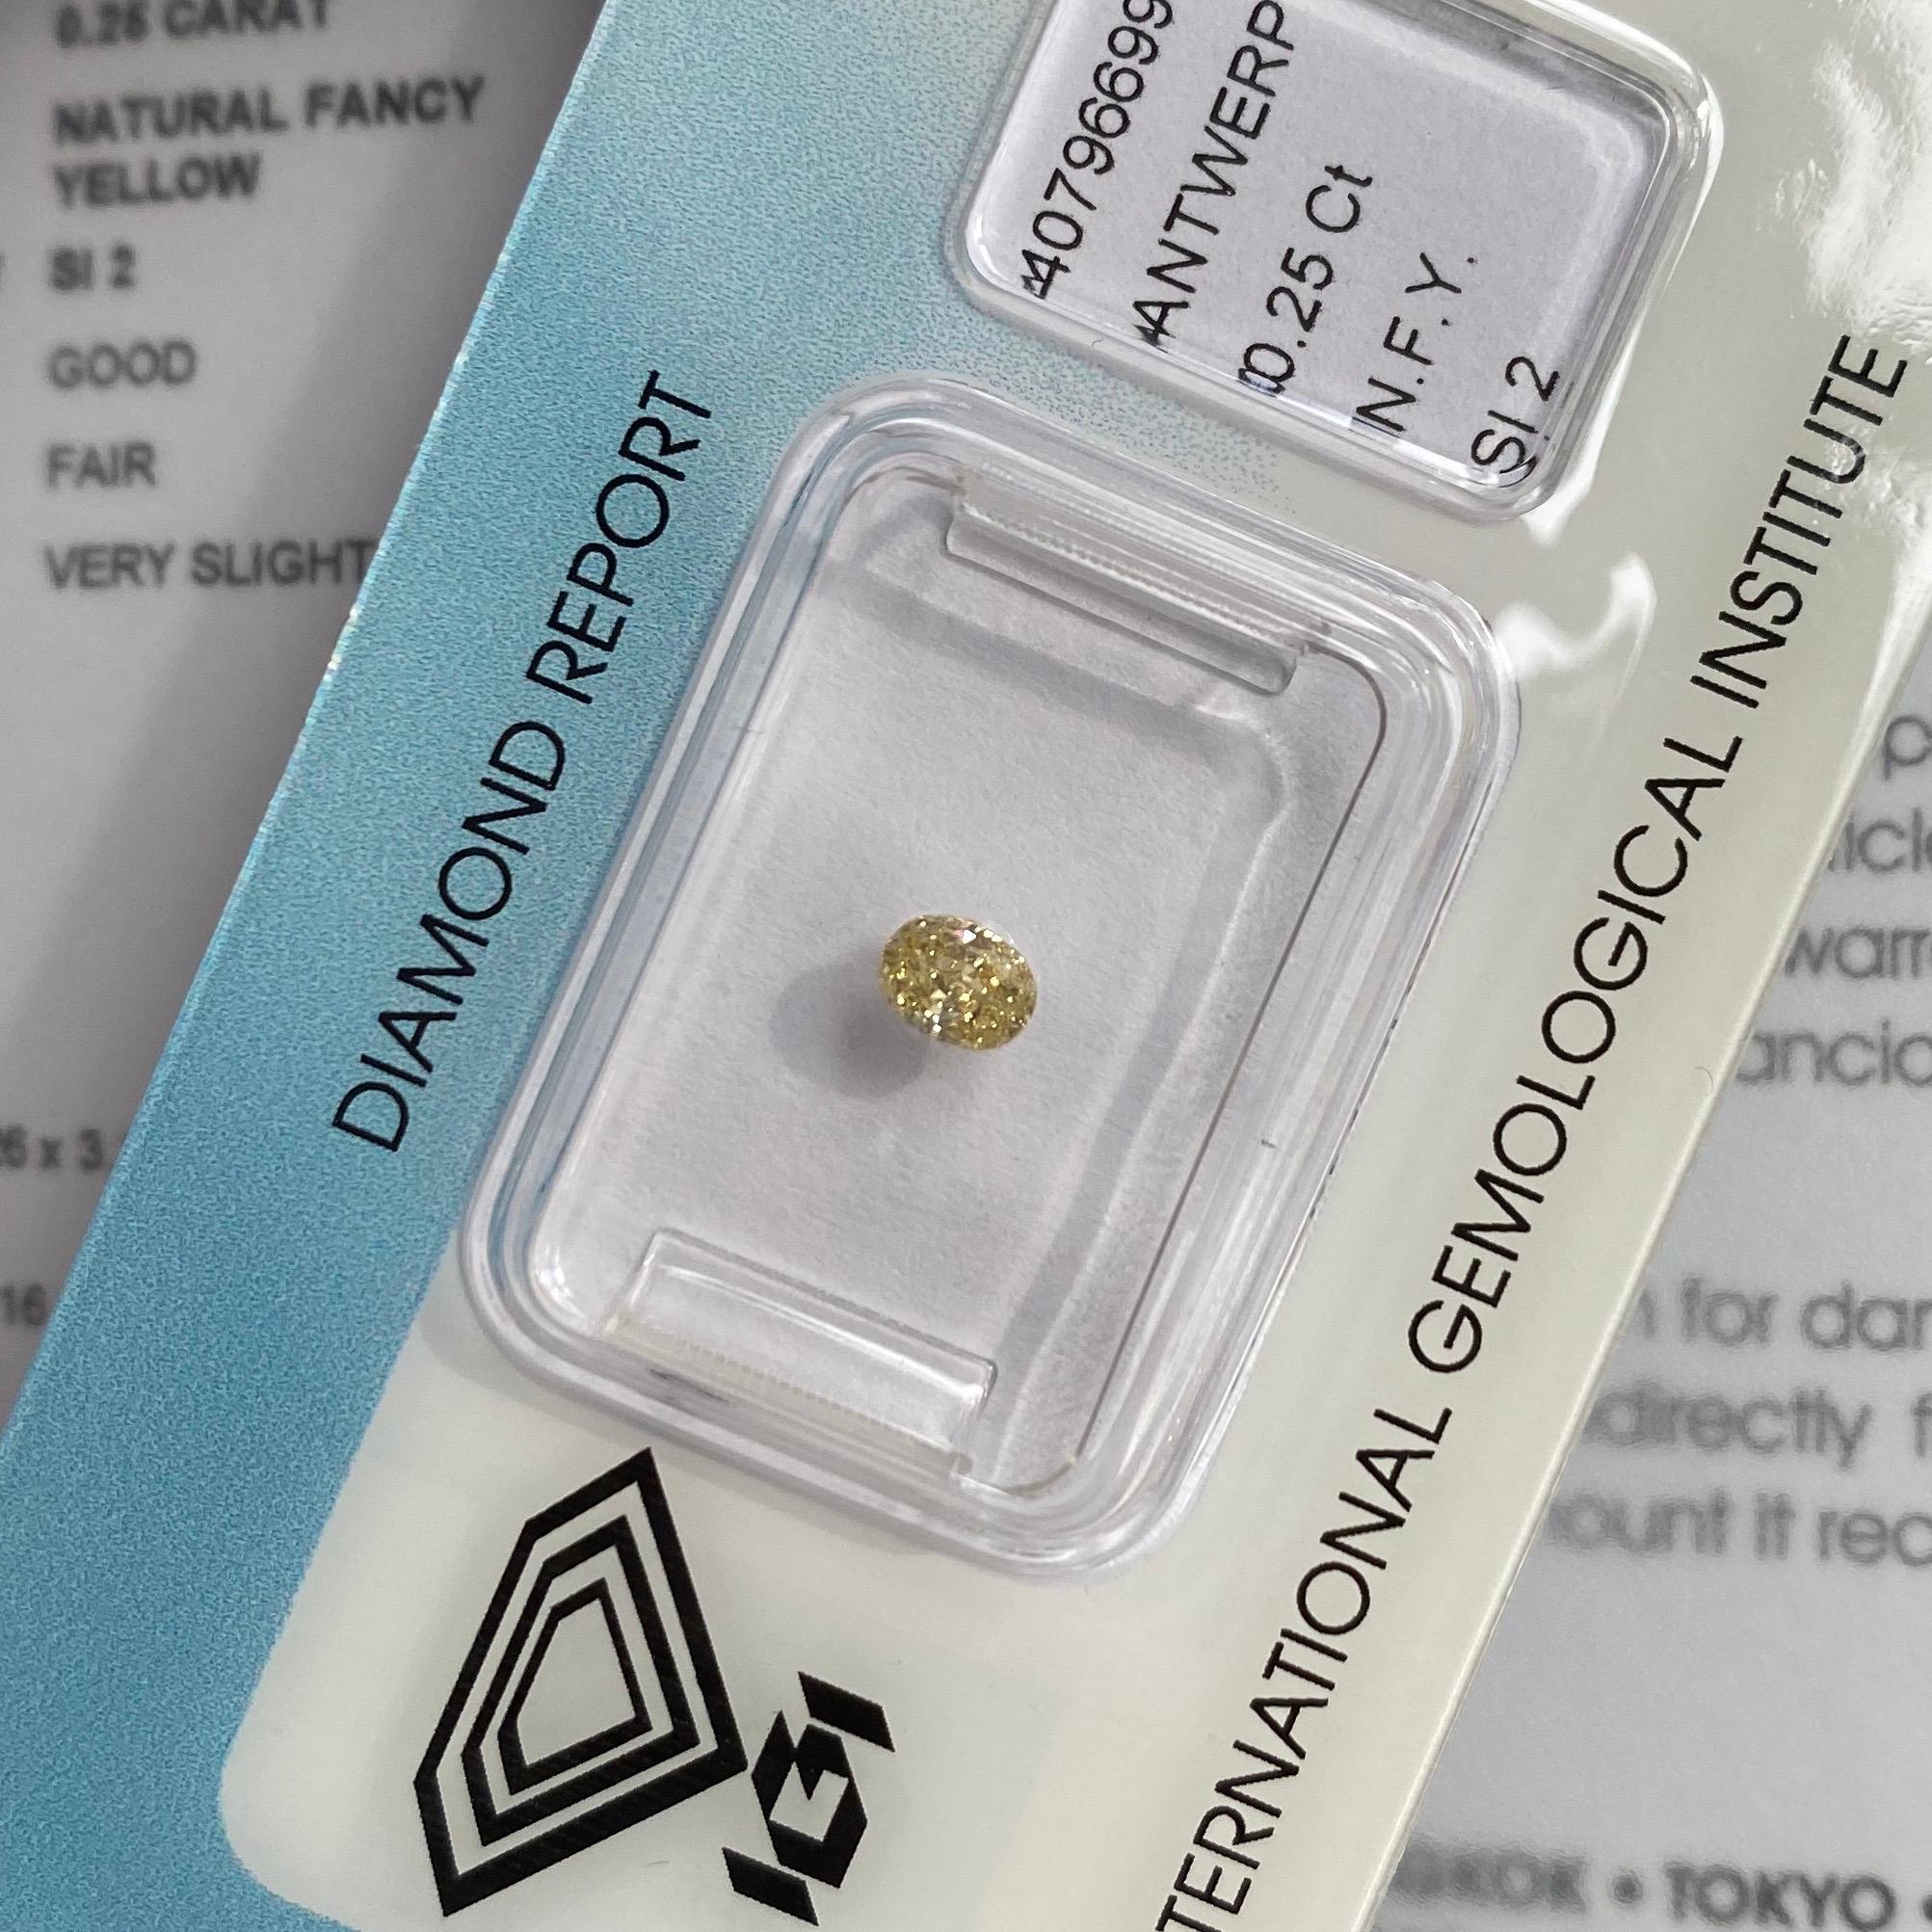 Natural Fancy Yellow loose diamond. Untreated with rare and natural Fancy yellow colour.

The colour on this stone is stunning, a bright fancy yellow colour. It also has a good oval cut which shows lots of light return and sparkle.

Si2 clarity so